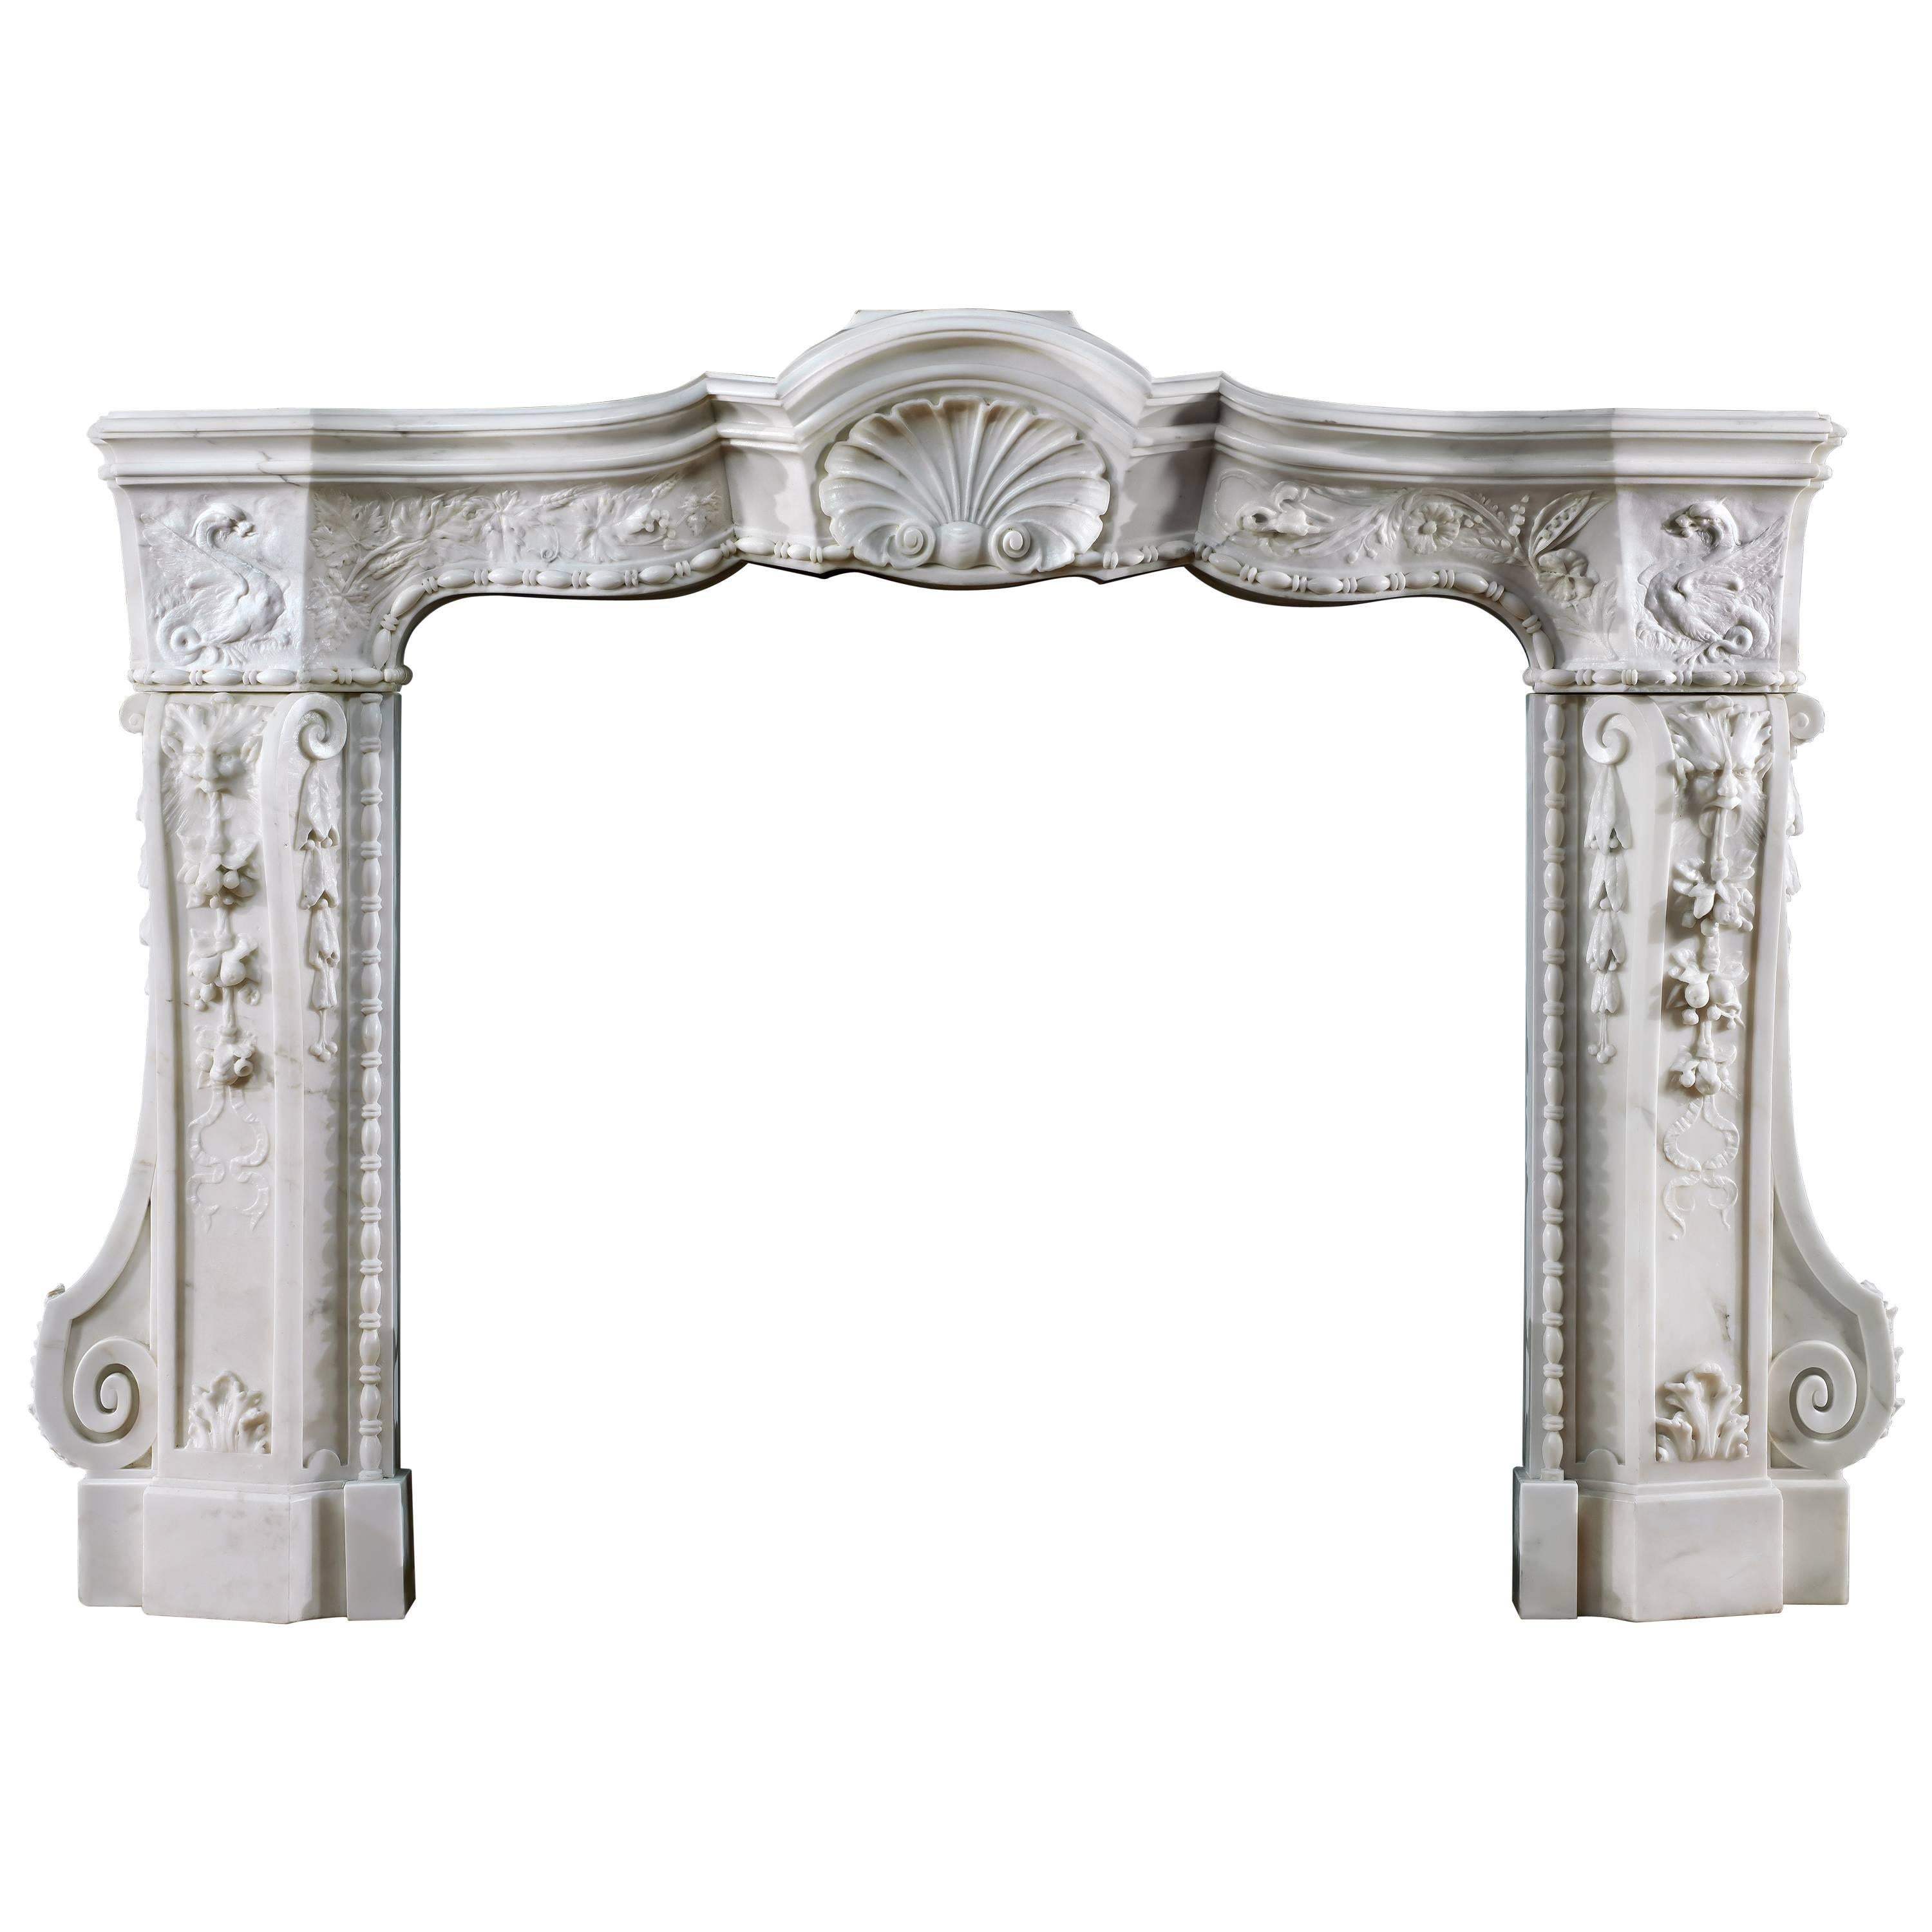 Rare 18th Century Italian Baroque Fireplace in Finely Carved Statuary Marble For Sale